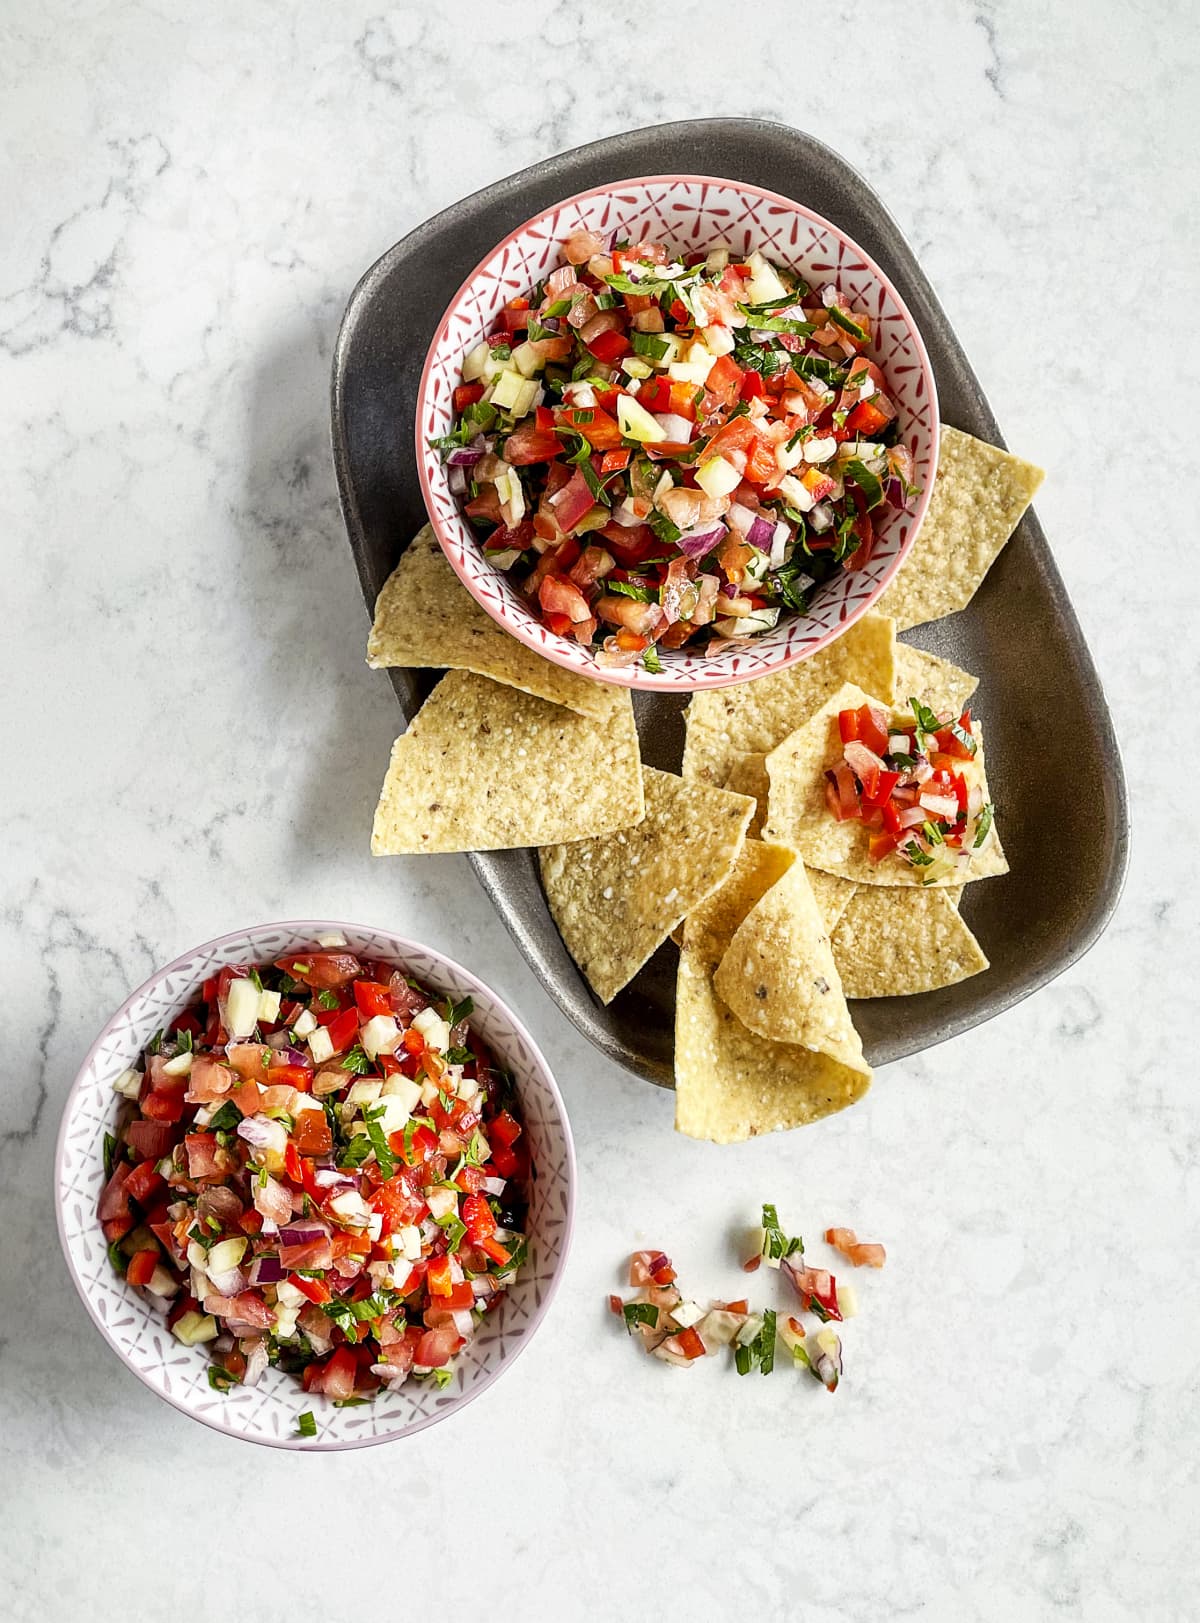 Bowls of salsa with tortilla chips